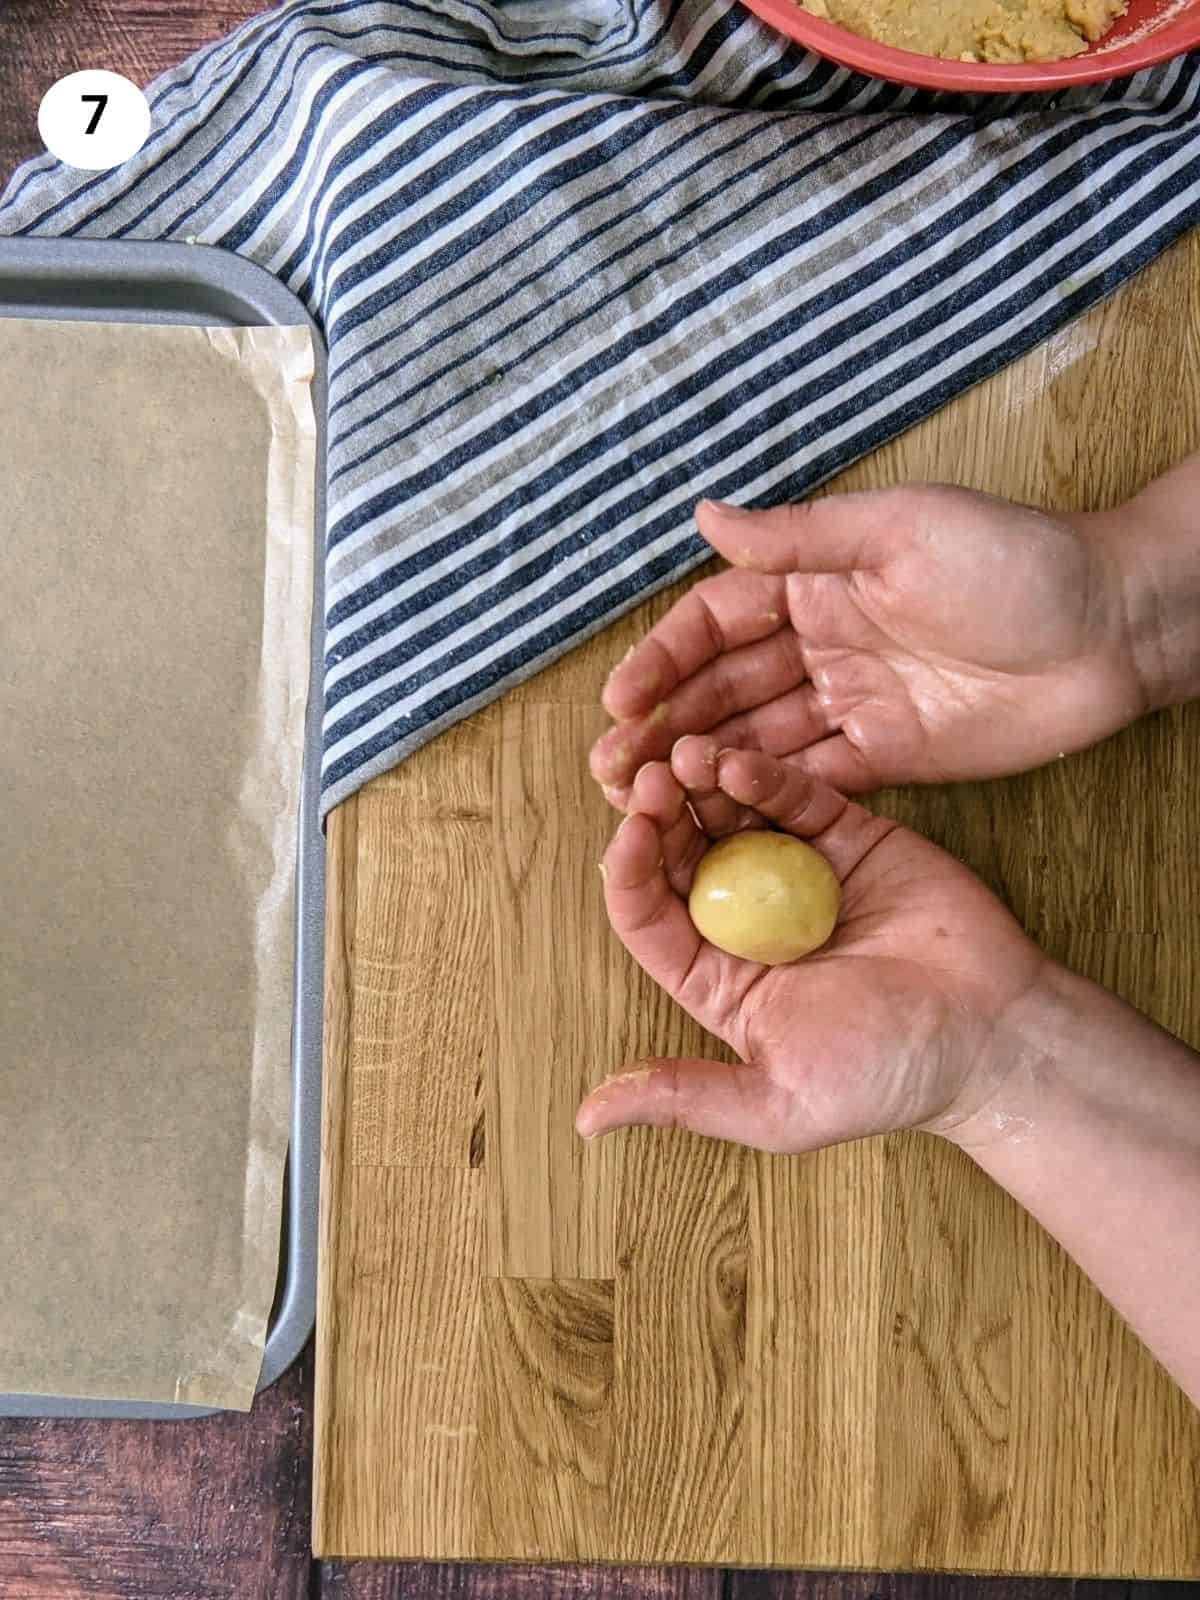 Shaping a dough ball for greek orange cookies.